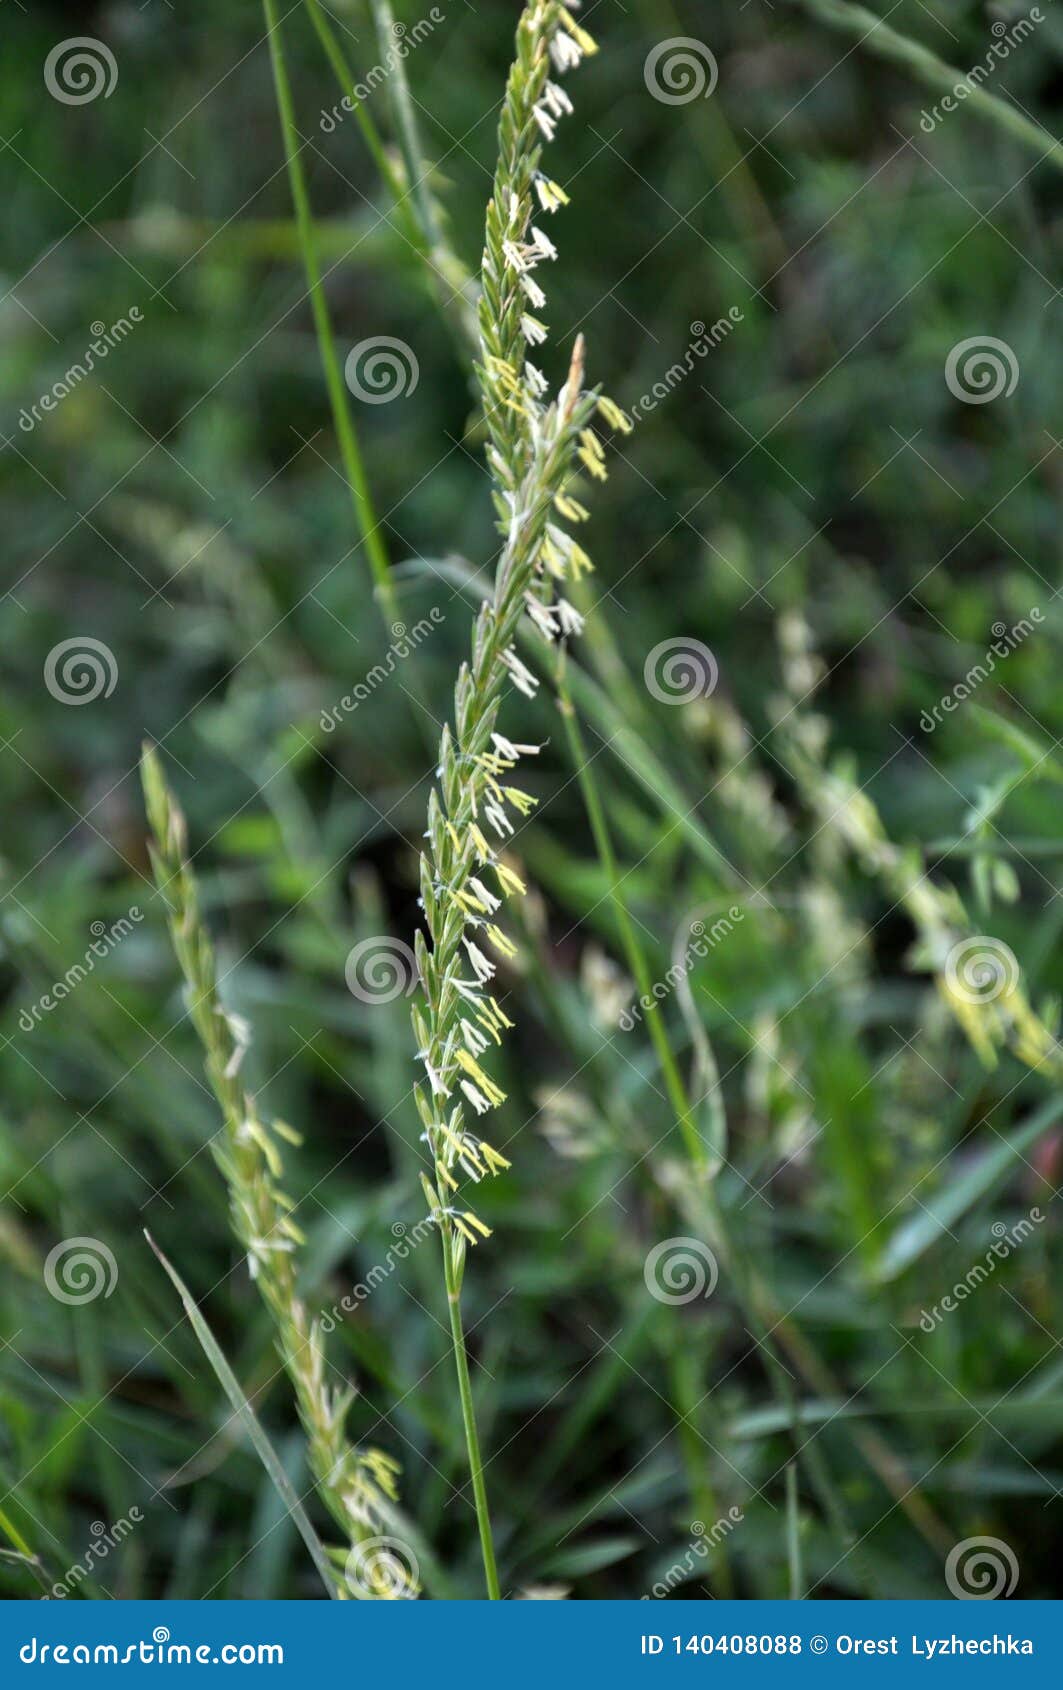 in the nature blooming ryegrass lolium perenne